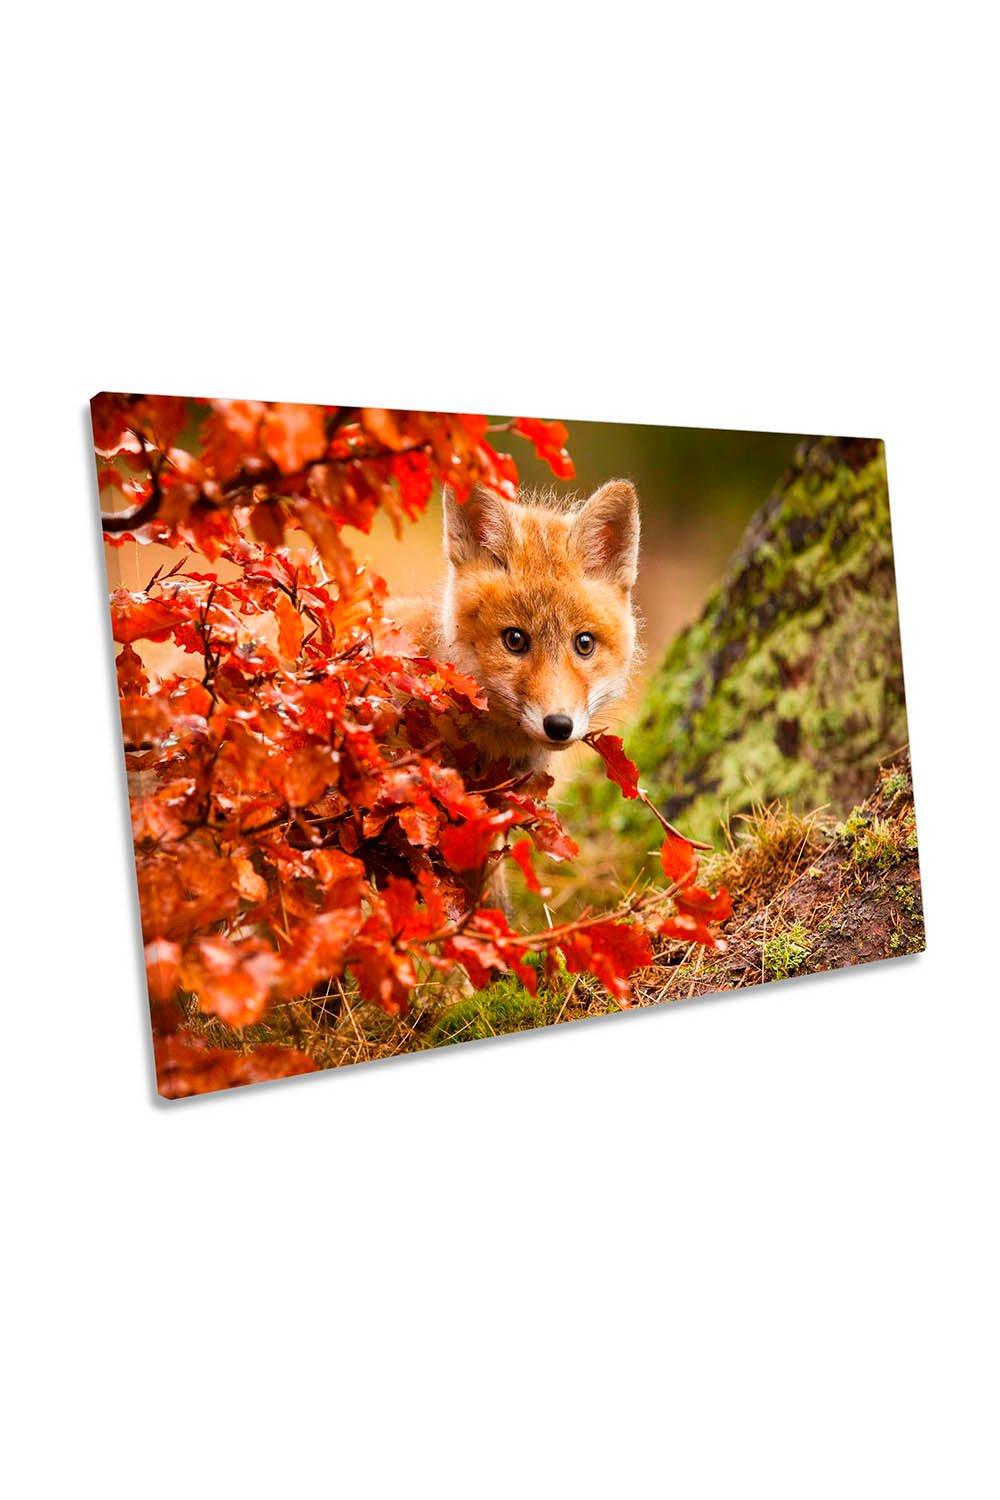 Fox Floral Red Flowers Wildlife Canvas Wall Art Picture Print